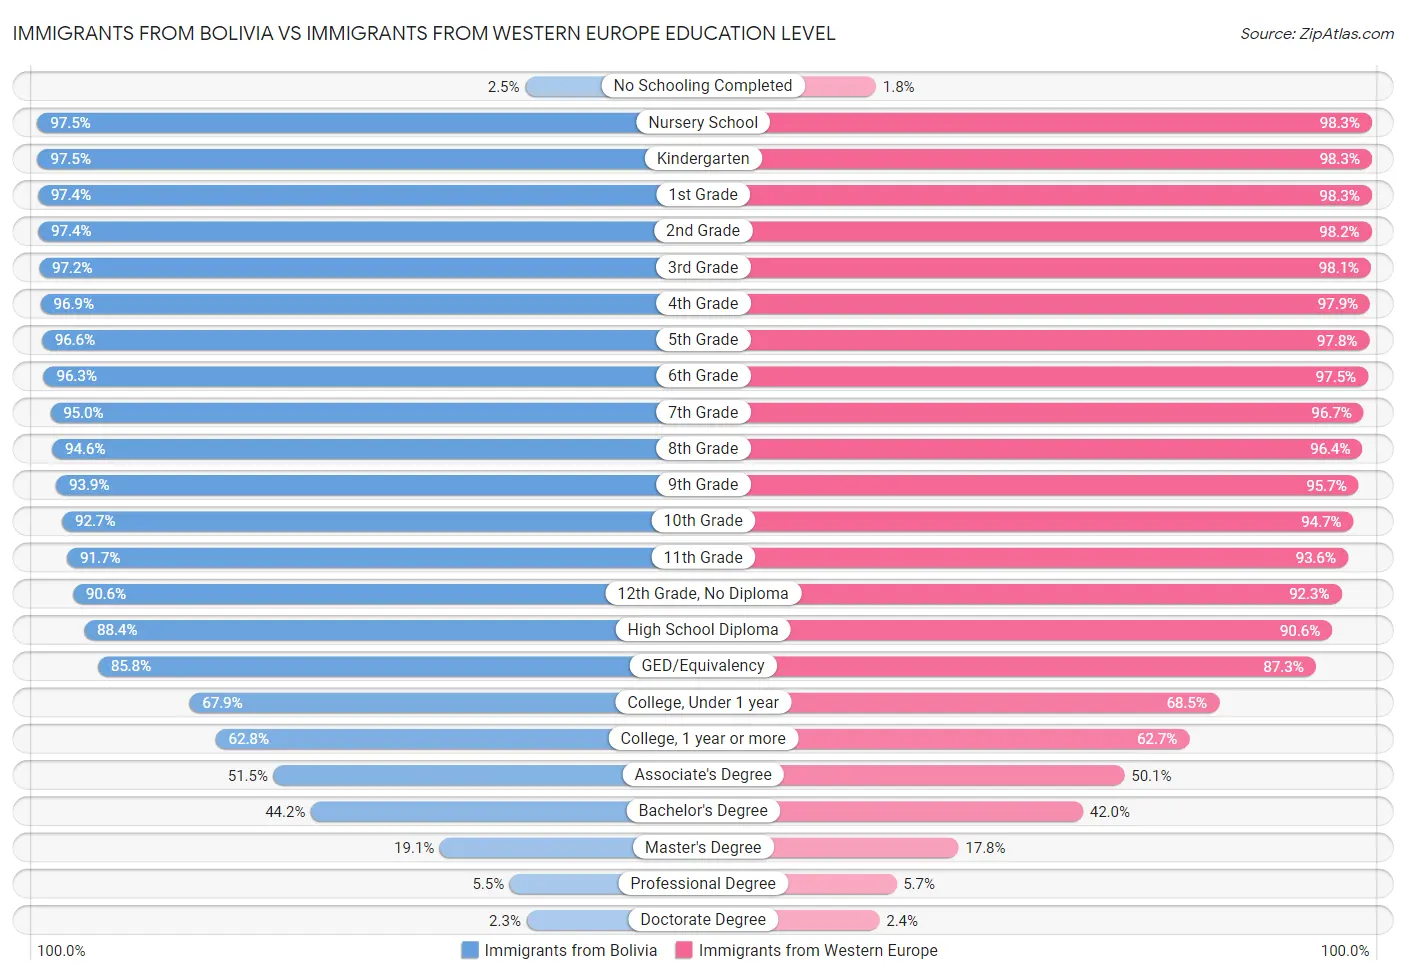 Immigrants from Bolivia vs Immigrants from Western Europe Education Level